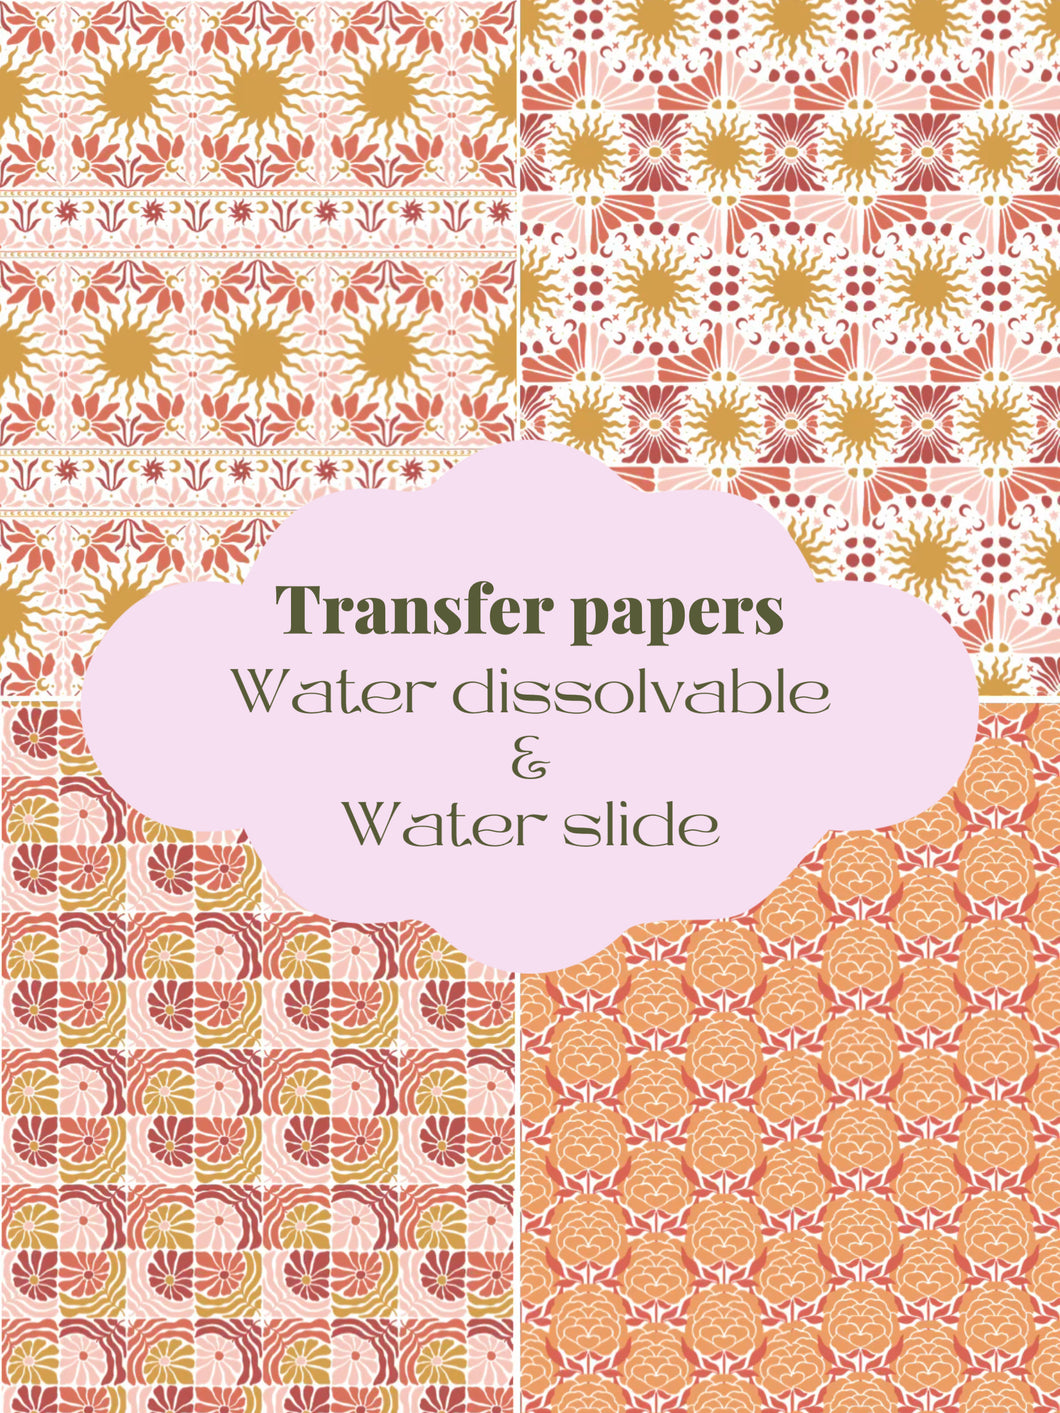 Autumnal suns transfer papers